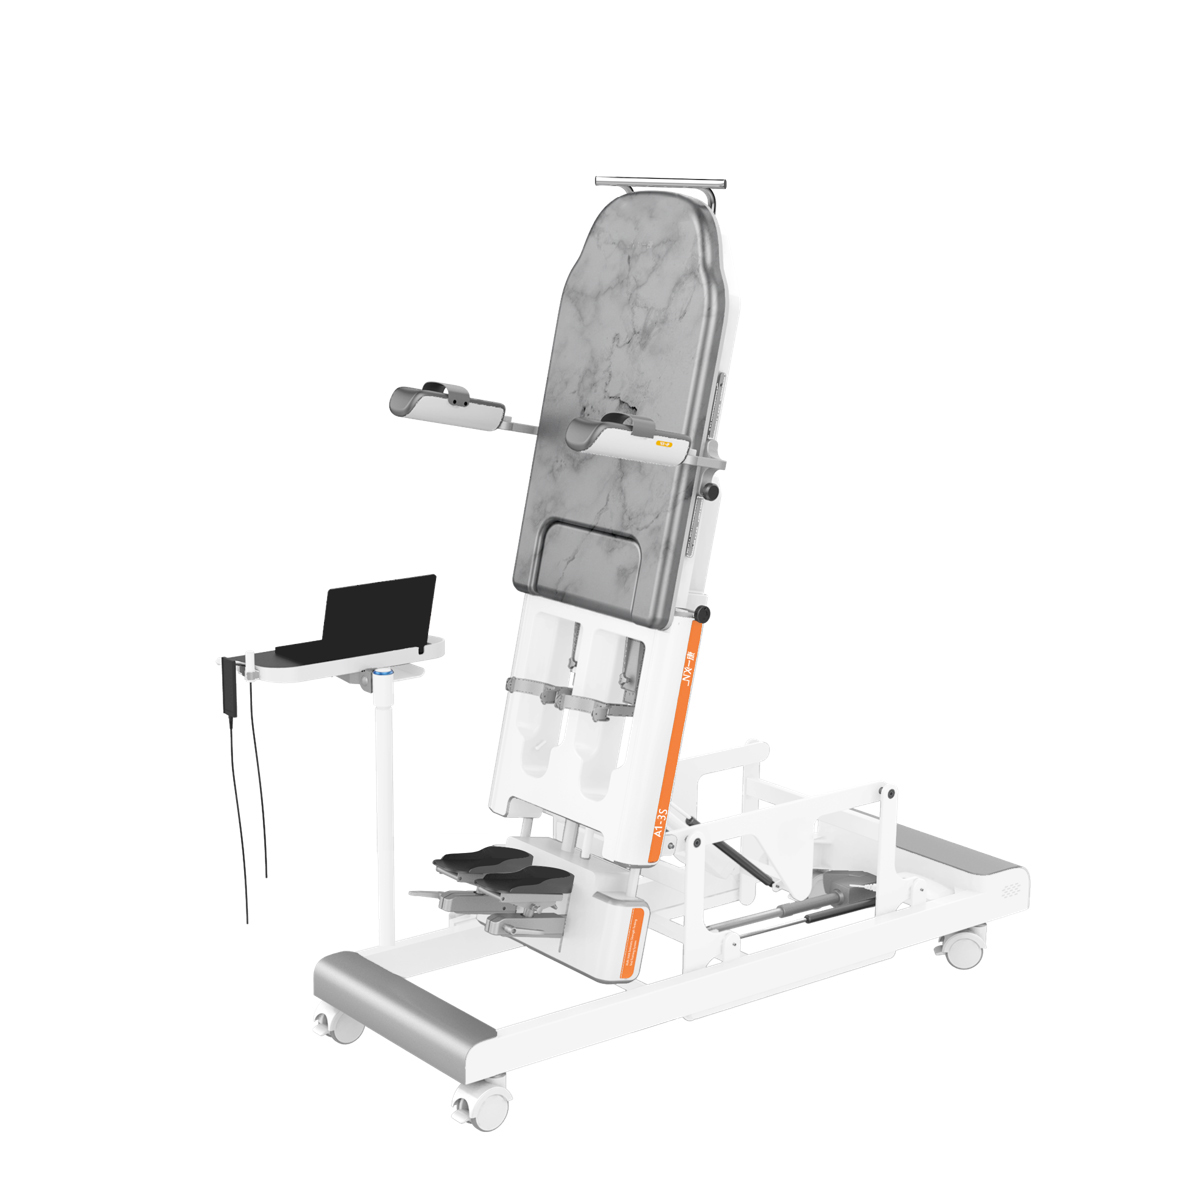 New Product Launch | Lower Limb Rehab Robot A1-3